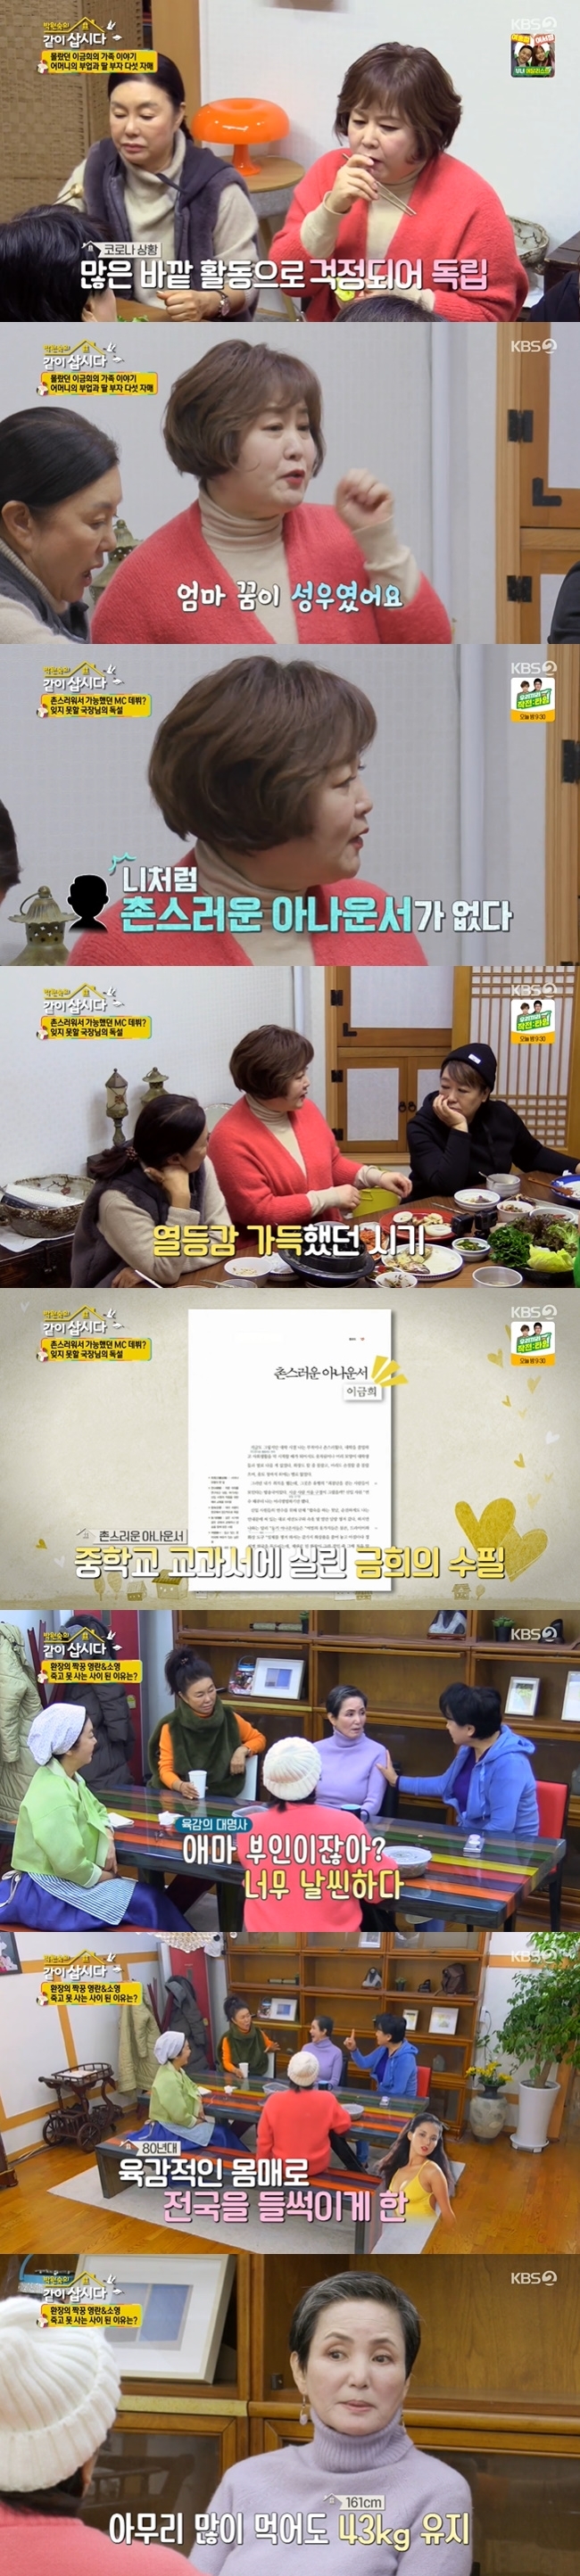 Actor Ahn So-young recalled the situation where he went to United States of America with his son because he was afraid of the eyes of people looking at the single mother.Lee Geum-hee and Ahn So-young visited the oblique song on KBS 2TV Lets Live With Park Won-sook Season 3 broadcast on February 2.Lee Geum-hee ate delicious food prepared by a sage such as siragi-ri miso and potato rice.When Kim Yeong-Ran asked, Do you live with your mother, Lee said, I recently came out. I came out last year.Ive been independent as far as the station is concerned, and I havent even finished organizing it yet, and I havent brought my clothes home.Lee Geum-hee recalled when she achieved her mothers grades when she was a child and filled 100 full fairy tales, saying, I want to read books without a circle when I have free time.My father was strict, and my mother never let go of my side job, Lee said, saying that his father was a police officer.He always made something because he was good at talent. My mothers dream was voice actors. My mothers voice is better than mine.He explained that he had been handed over by his mother, who led the atmosphere among the friends, saying, You have not seen the broadcasting station test. He released broadcast episodes that he appeared in, such as the narration of the Human Theater and TV with Love.Lee Geum-hee, who was selected to host the 6 oclock homecoming at the time of joining the announcer, said, At that time, the director said, You should do this for the rest of your life.He said, No rustic announcer will come in like you in the next ten years. He said, I felt inferiority among the colorful motives.Lee Geum-hee, who later realized that the cold announcer was his advantage, wrote an essay with this content, and he was proud that this essay was published in middle school textbooks and that Korea was studying essays to foreign people.After Lee Geum-hee left, Friend An So-young of Kim Yeong-Ran visited the oblique. Park Won-sook said, You are Mrs.I am so thin, said Ahn So-young, who was dry.Now that Im in Age, Im not the same, said Kim Yeong-Ran, who said, Soyoung, I know, doesnt eat less than I do. But I dont get fat.Im a lot more than he is, even if I lose 11 kilograms.When Park Won-sook asked, Have you not gained weight since you were young? Ahn So-young said, It is steamed now.When I was a child, I was only 43 to 44 kg. I only had one piece, but people thought I was the whole Mrs.Kim Yeong-Ran also felt sorry for Friend, saying, An So-young is active, clear and masculine.Ahn So-young, who gave birth to a son in his 40s in 1997, revealed his story of going to United States of America because of his son.When Ahn So-young explained, When I had a baby, it was an era when I did not understand a single mother in that era. Park Won-sook said, I was a single mother from the beginning.I never did marriage, said Ahn, who said, I just had a baby. He said he had raised his son alone for 25 years.I wasnt sure I could live here, Ahn said.I went to United States of America alone, so I had to get up to rumors and gossip, and I was going to my sons neck because I was afraid of the bad news. I first went to Vic-Fezensac and later at the restaurant.Its heading to the ground. There was no helper. I found it and did it.Ahn So-young, who had a restaurant for Sun-to-doo because of his son who liked Sun-too, explained that he had spent so much time because of Vic-Fezensac that he could not sleep in bed, but he was forced to return to Korea because his place was neglected.Im really upset about living hard, and I dont know why I see celebrities as prejudices even if I live hard, said Ahn So-young, adding, I think the image is wrong since I was a child.I think I was so dirty and I thought I was tired. 